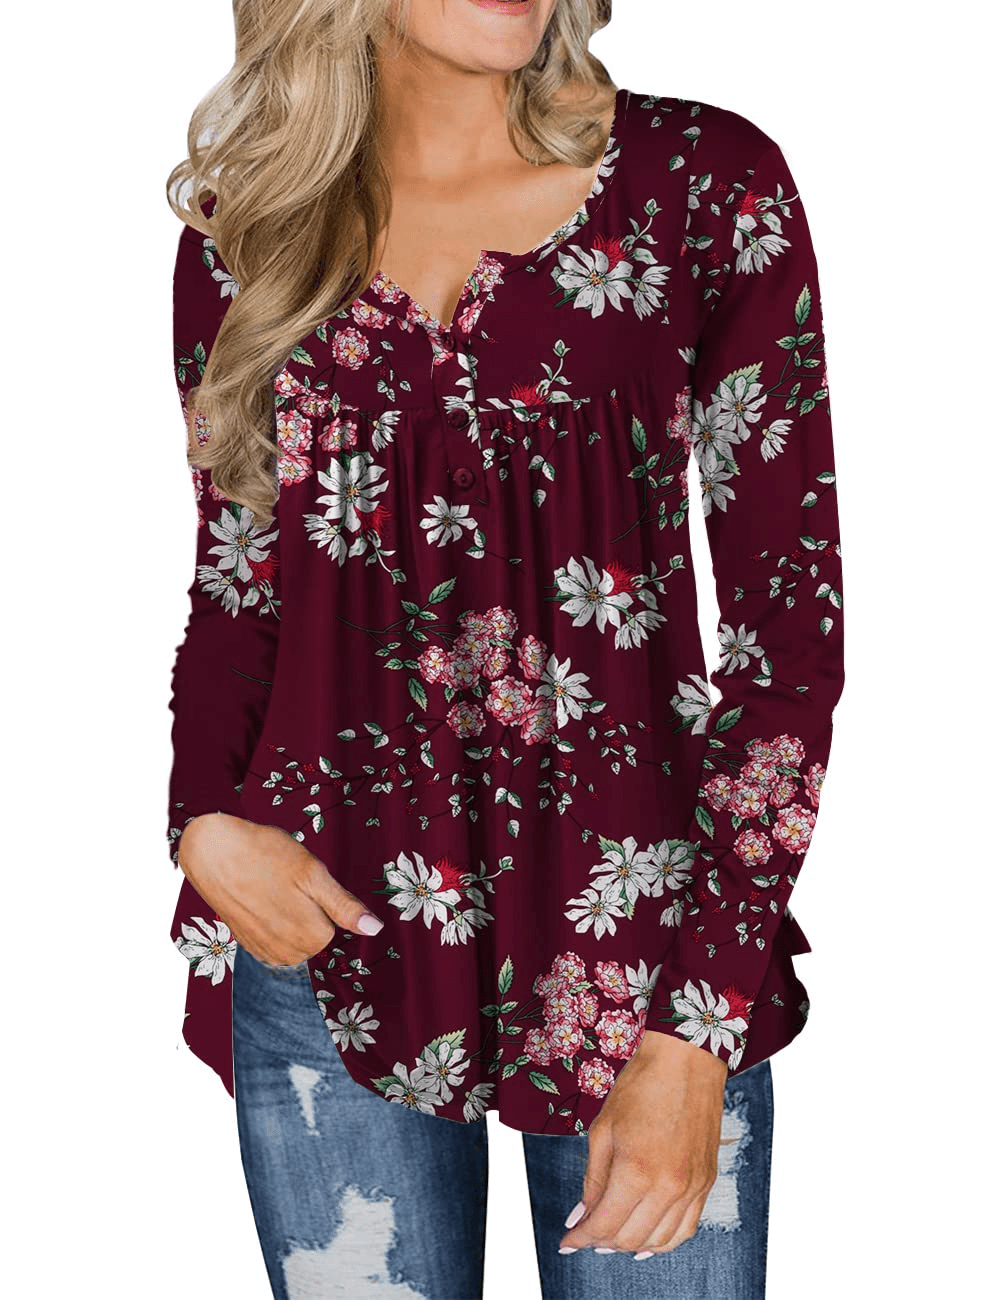 a.Jesdani Womens Summer Plus Size Tunic Tops Short Sleeve Blouses Casual Floral Henley Shirts 